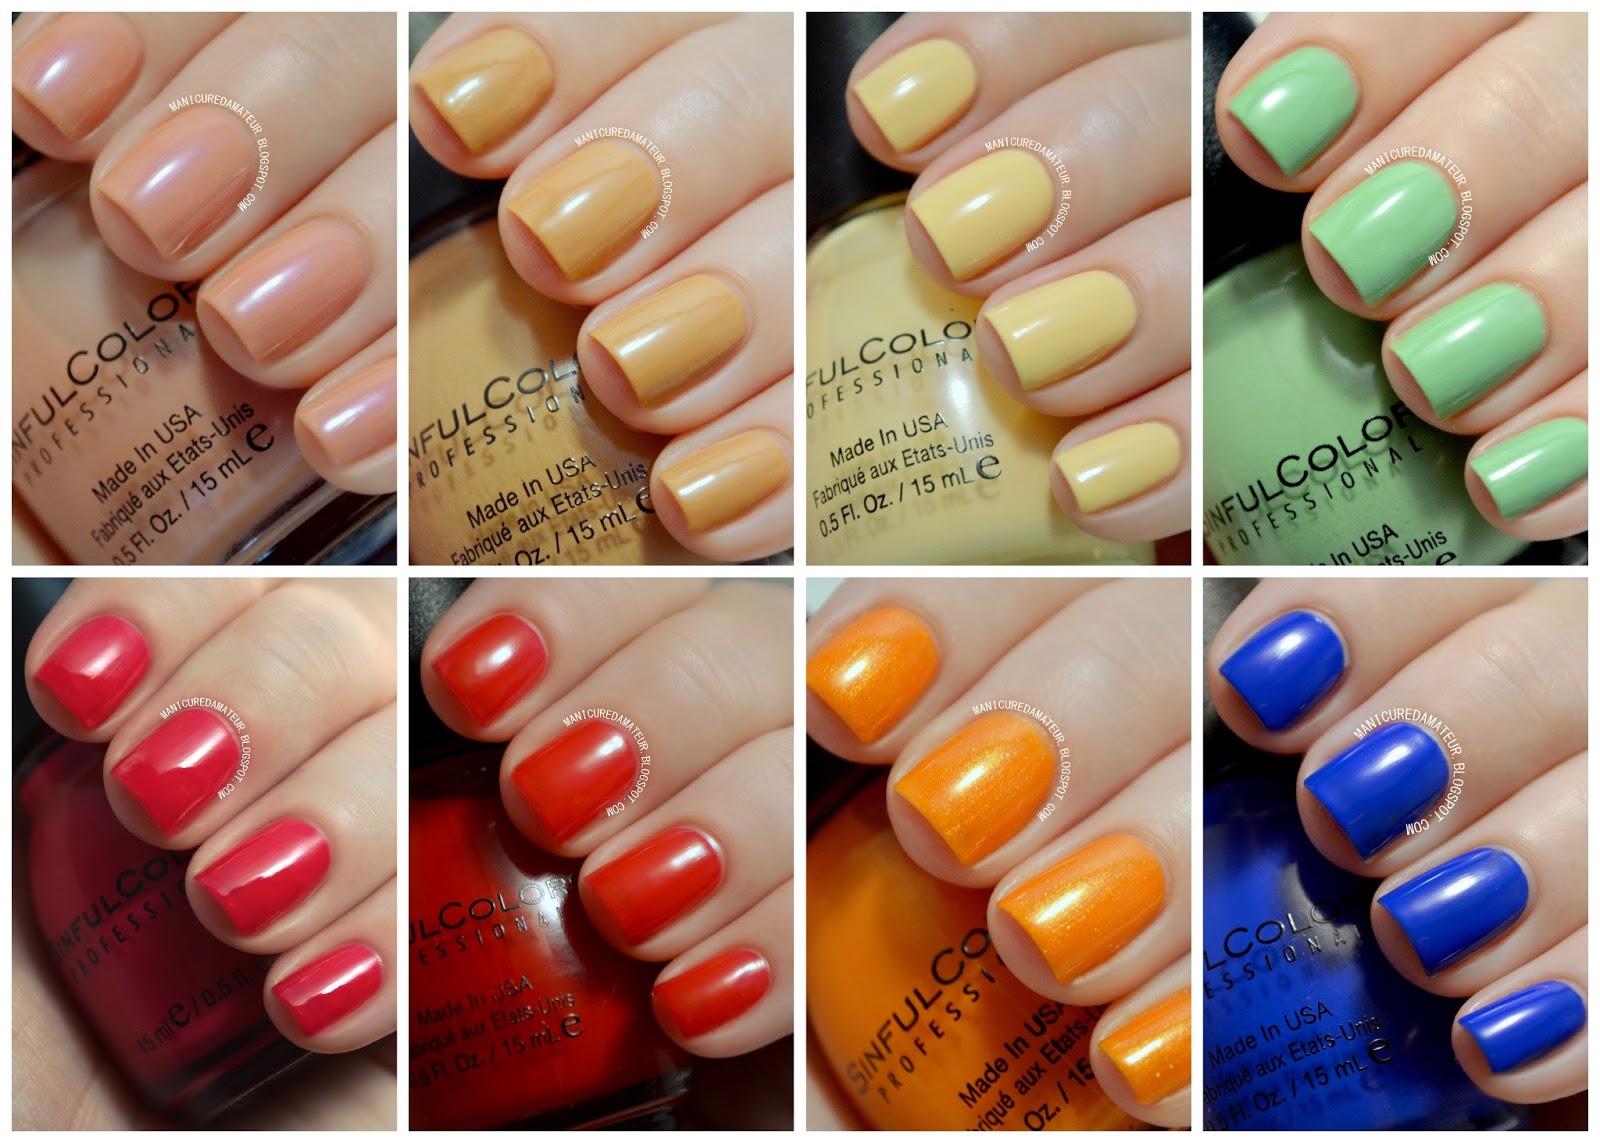 9. Sinful Colors Professional Nail Polish in "Let's Talk" - wide 4